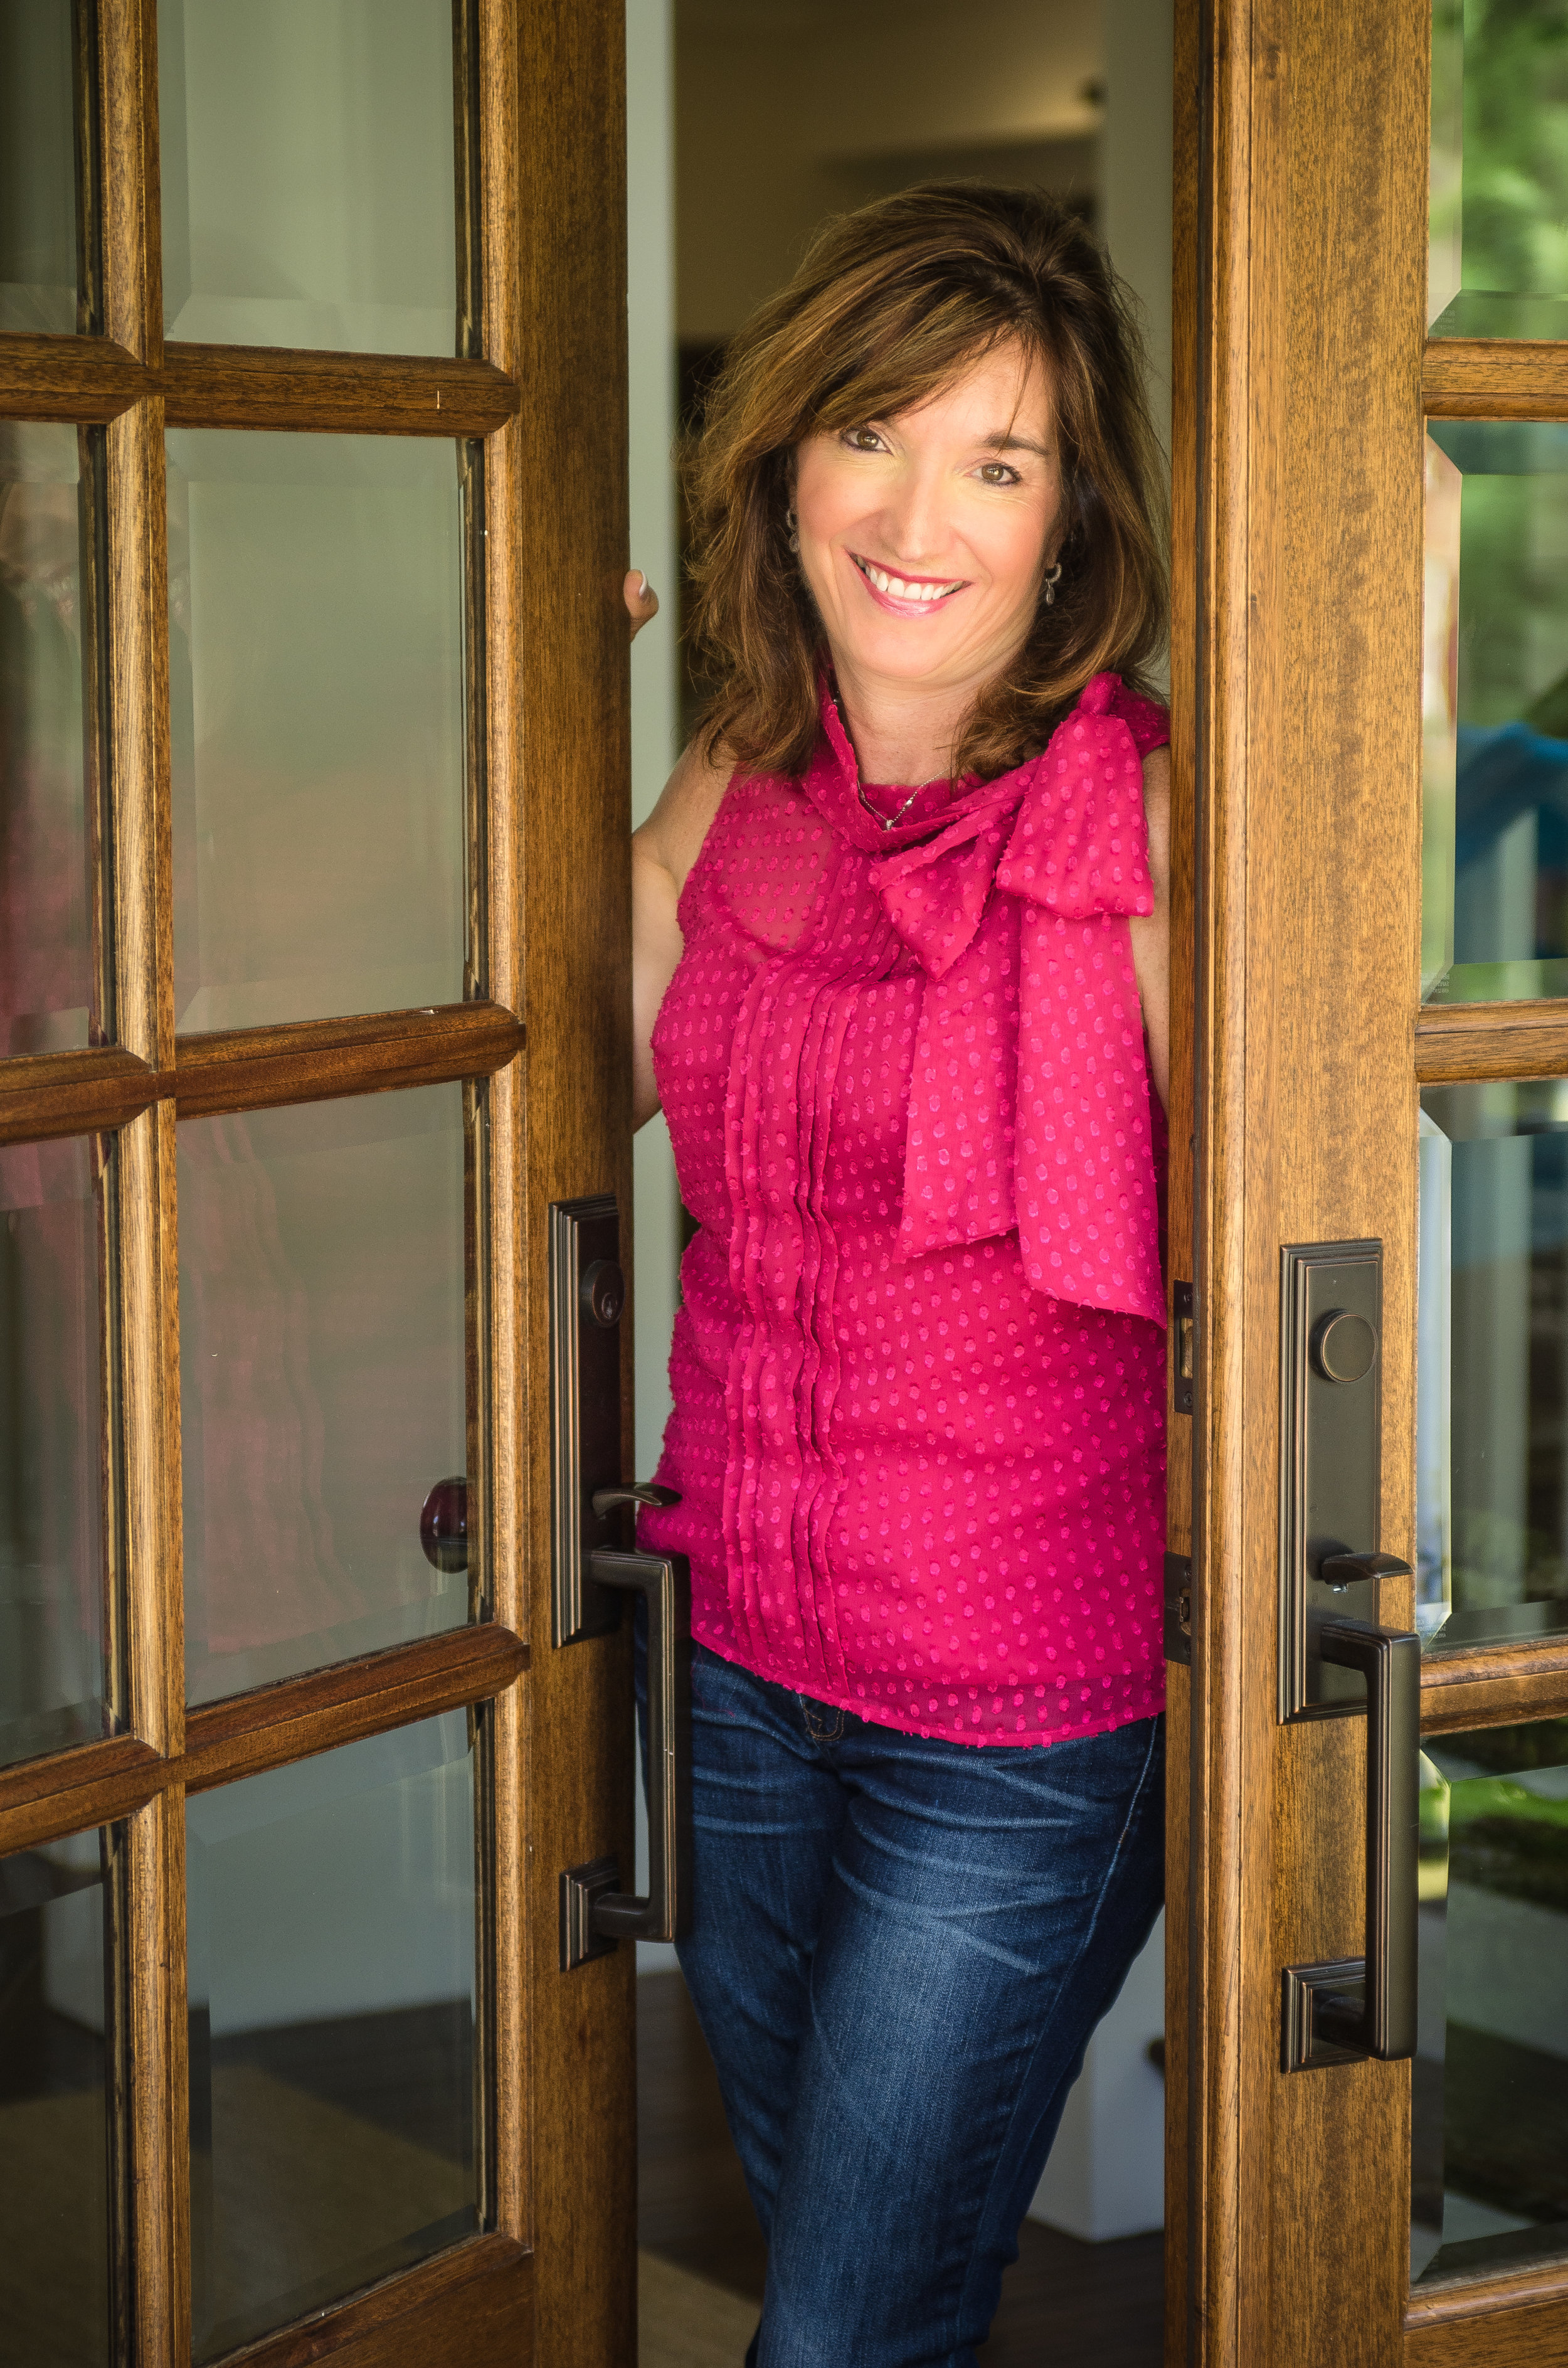 About Lisa Parke Interiors